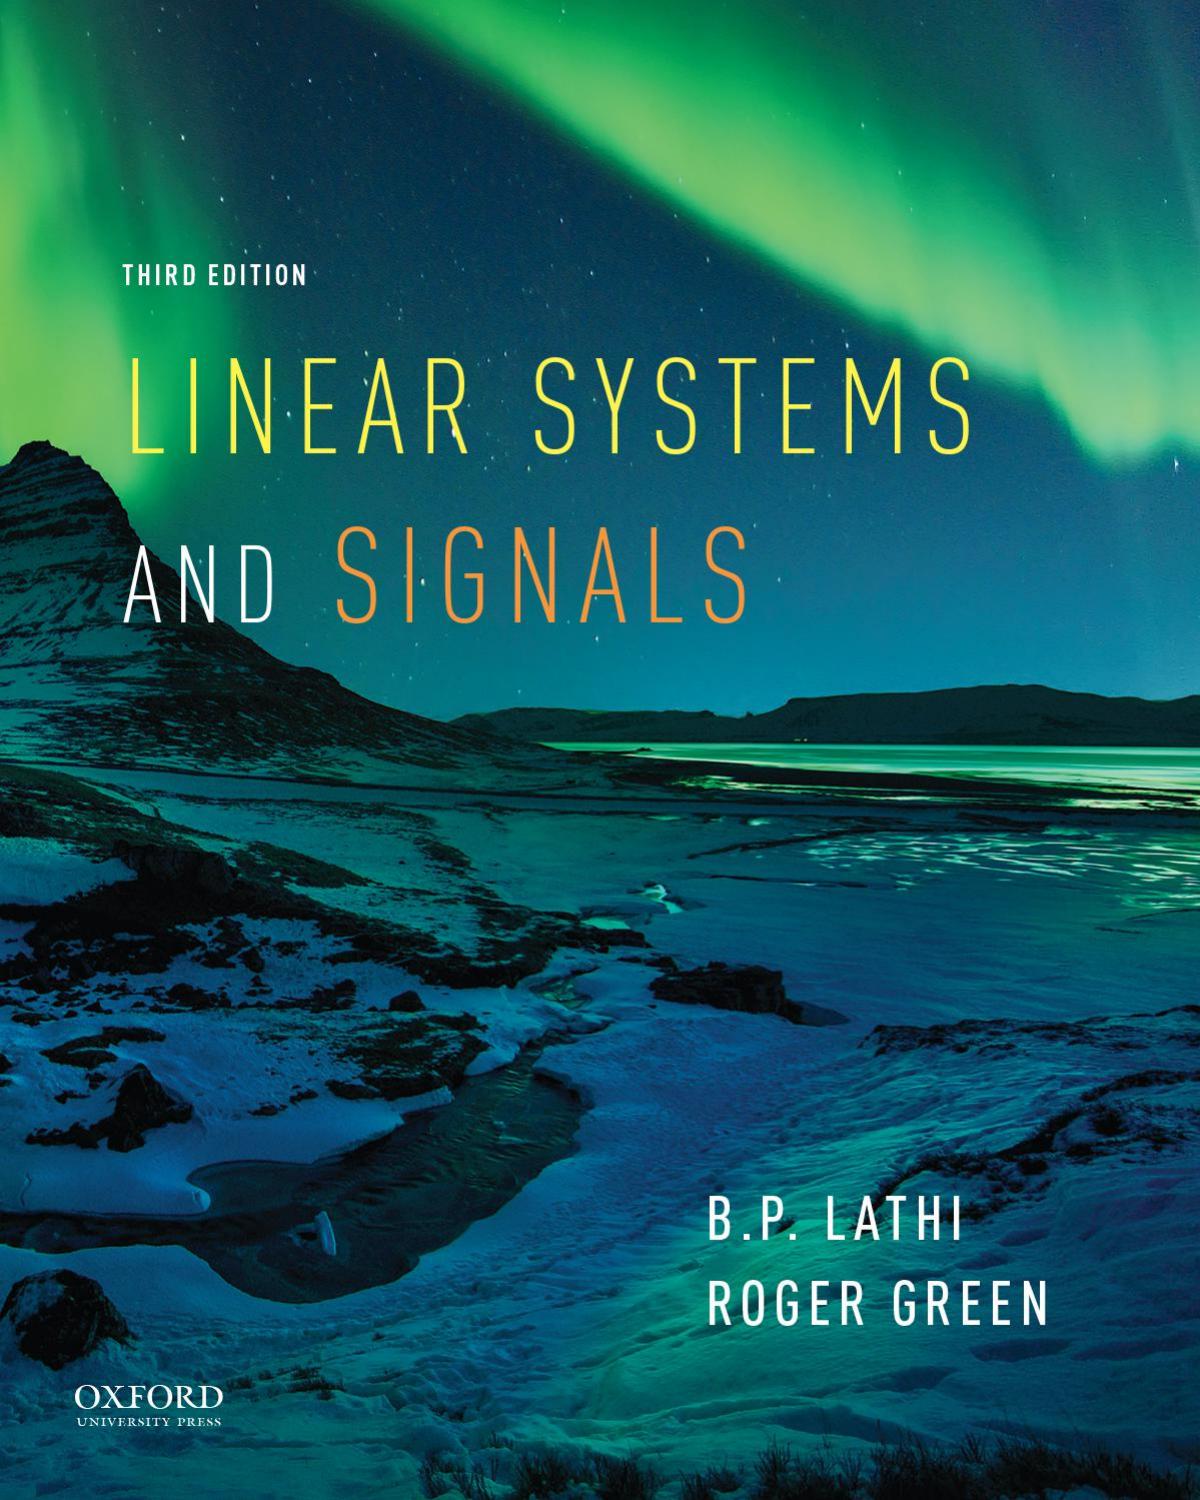 LINEAR SYSTEMS AND SIGNALS by B. P. Lathi & R. A. Green